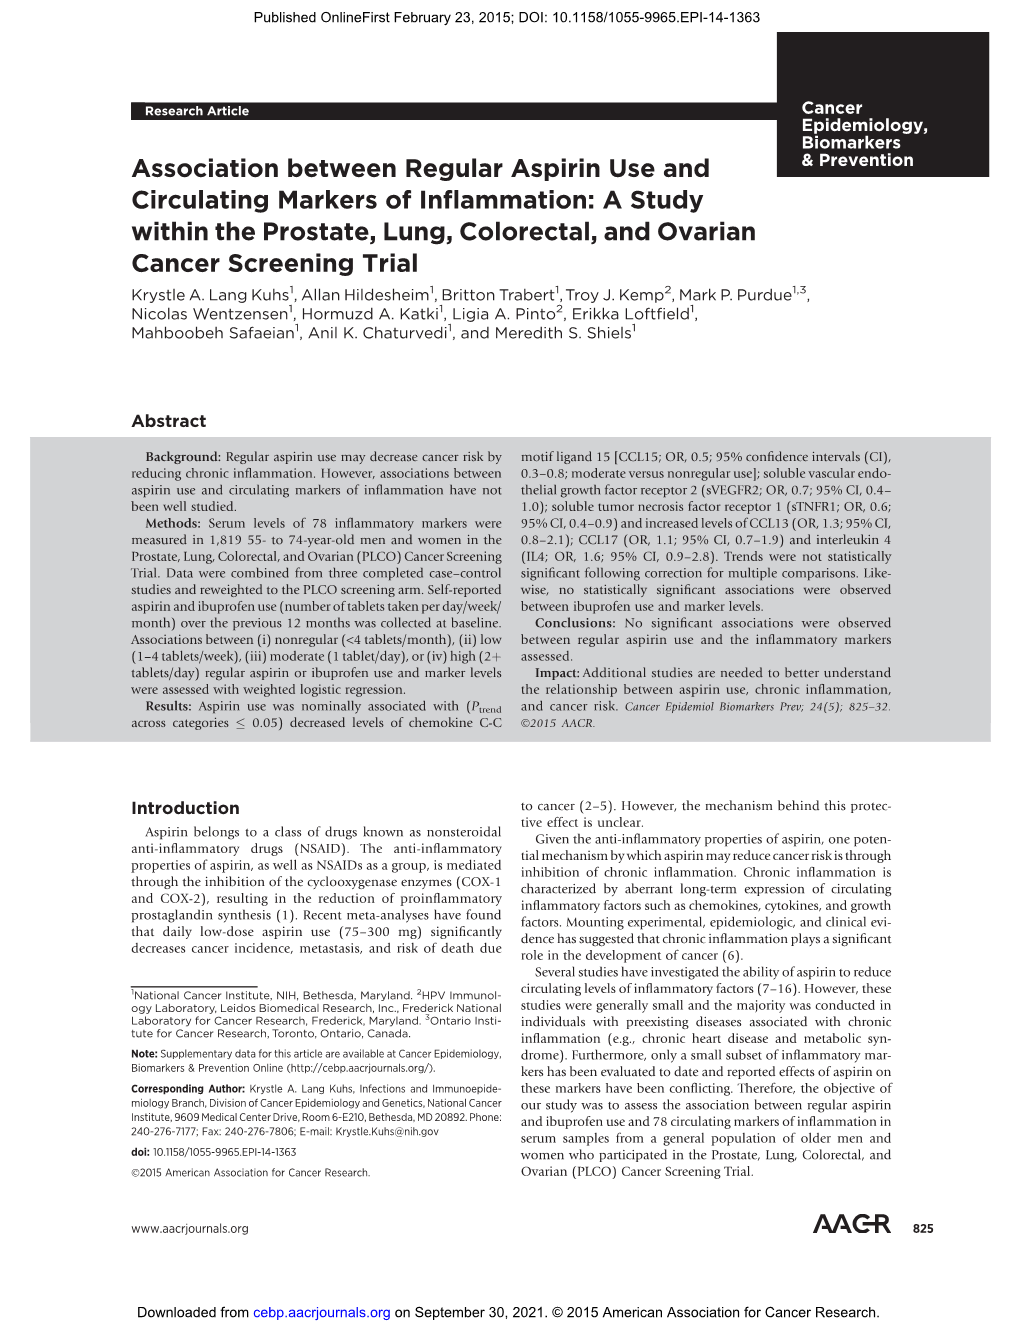 Association Between Regular Aspirin Use and Circulating Markers of Inflammation: a Study Within the Prostate, Lung, Colorectal, and Ovarian Cancer Screening Trial